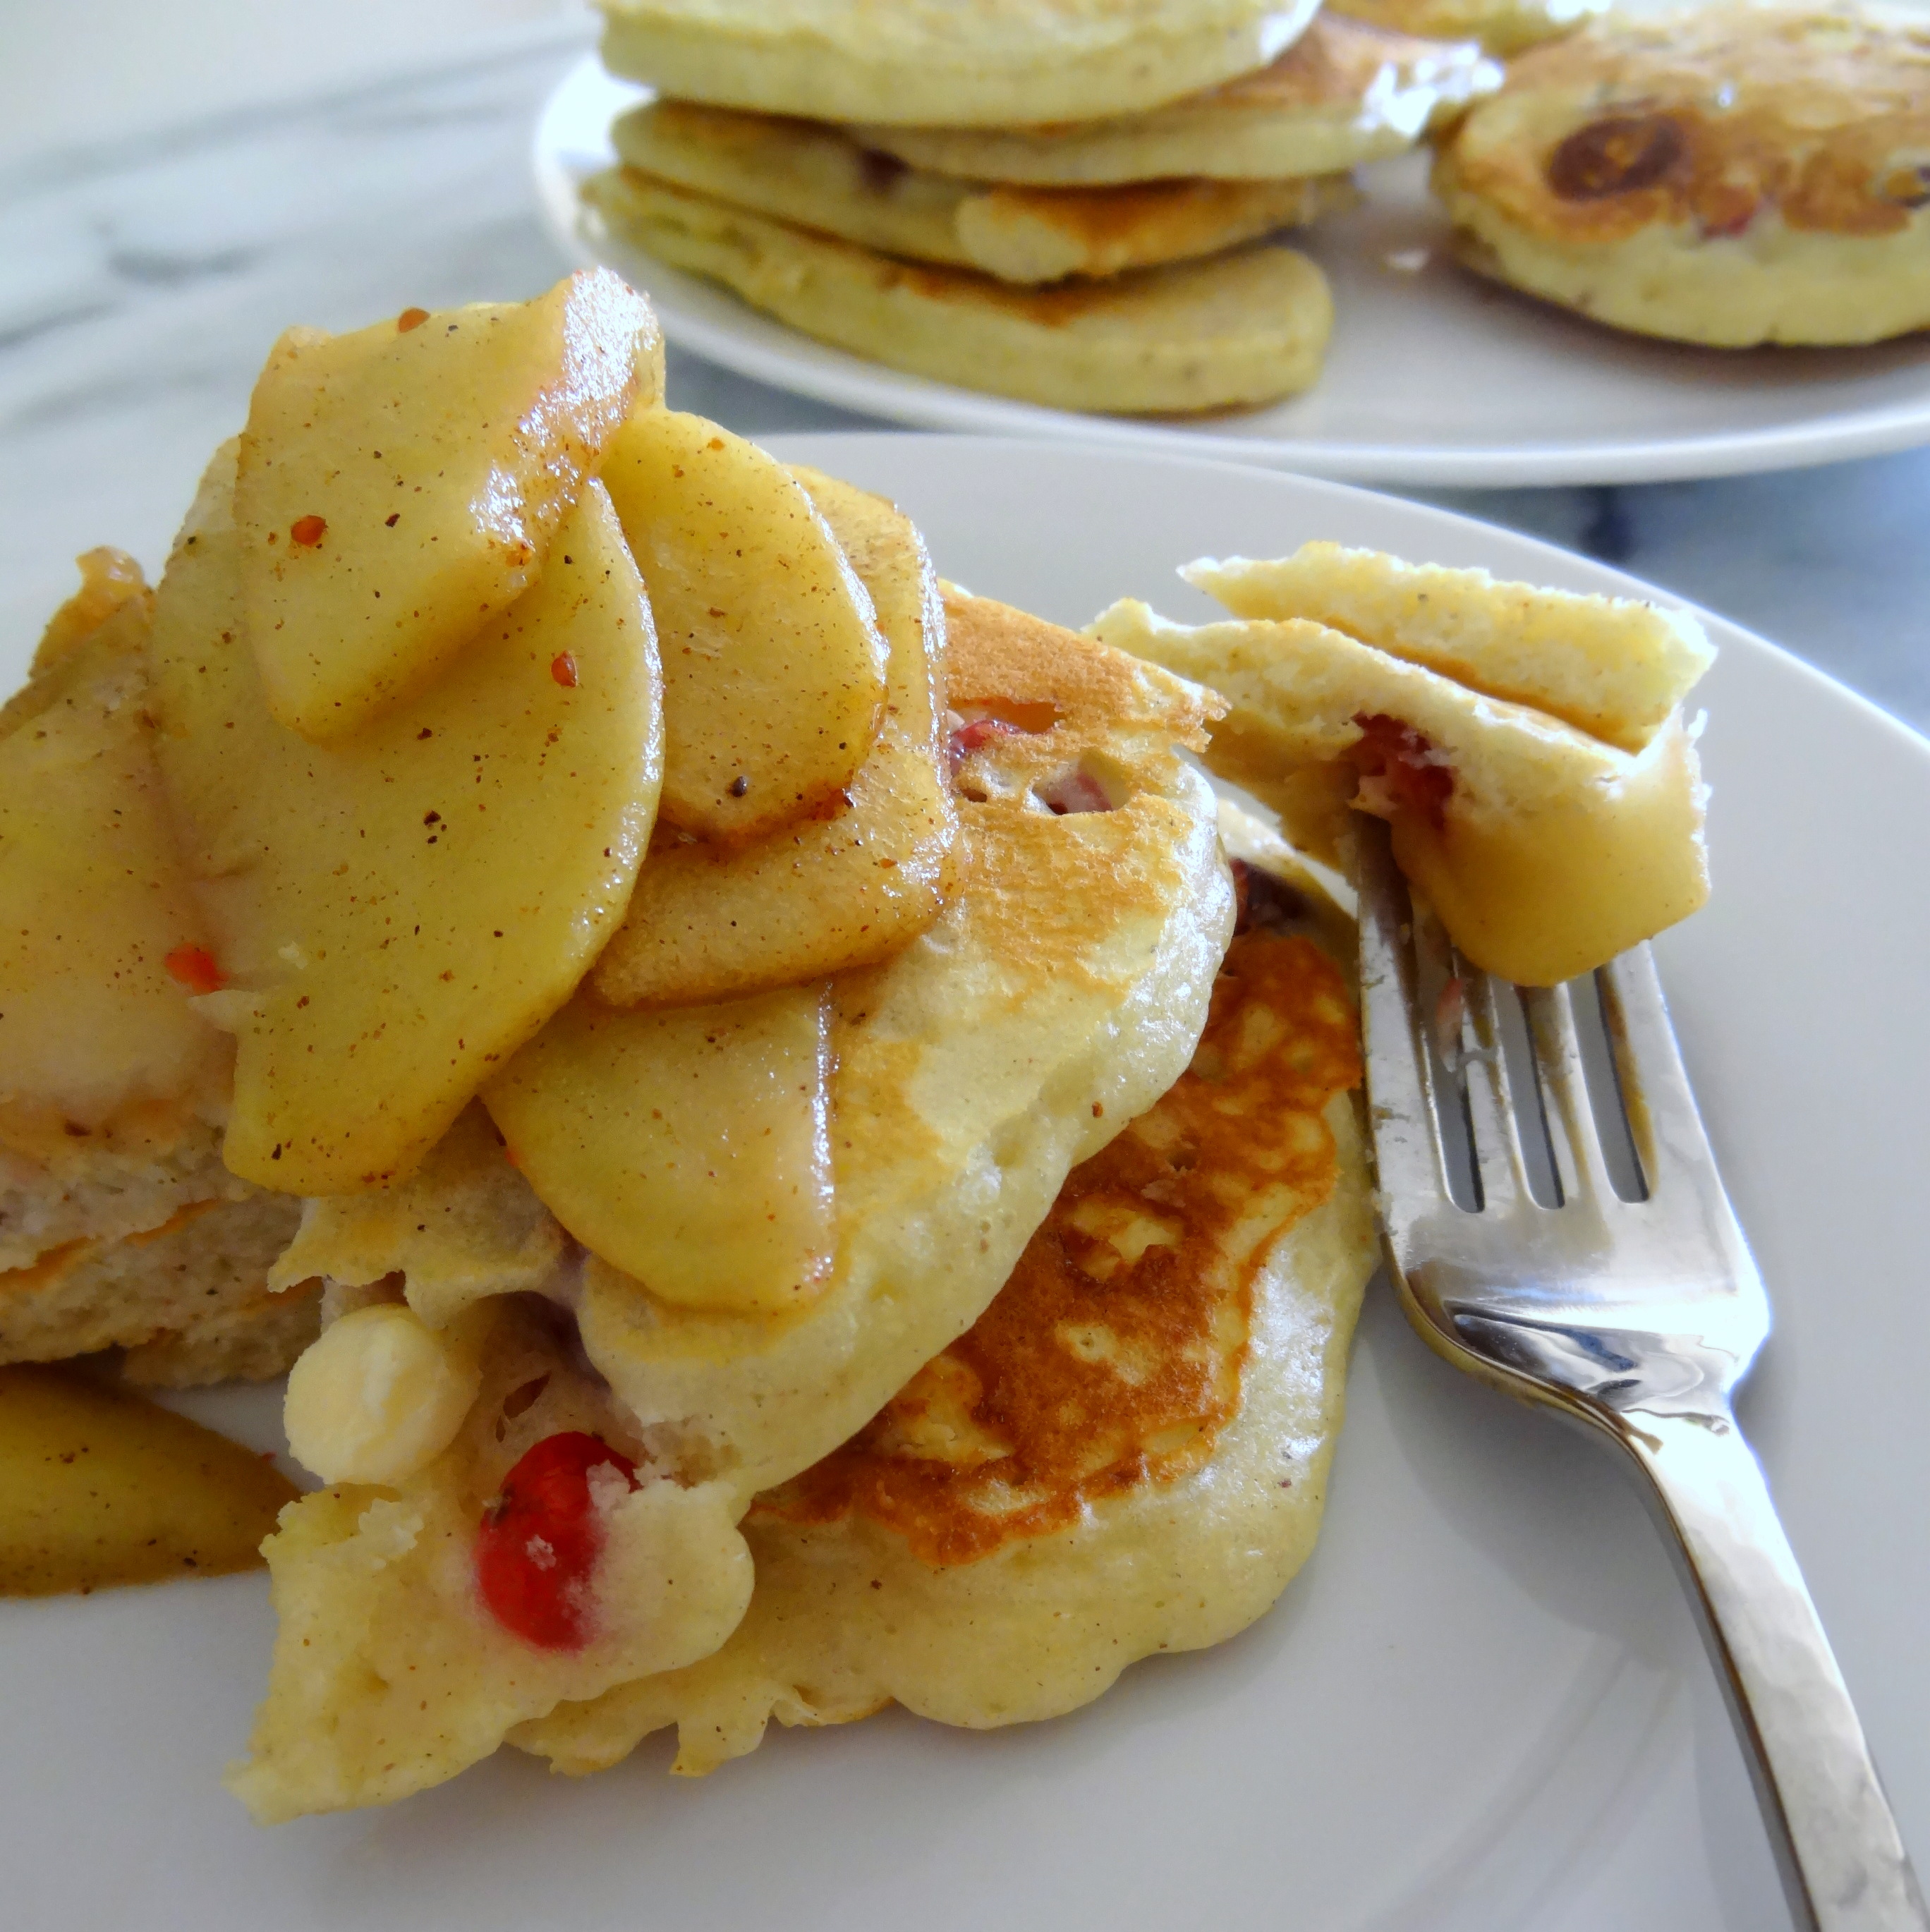 Spiced Cranberry Pancakes with Sautéed Apples